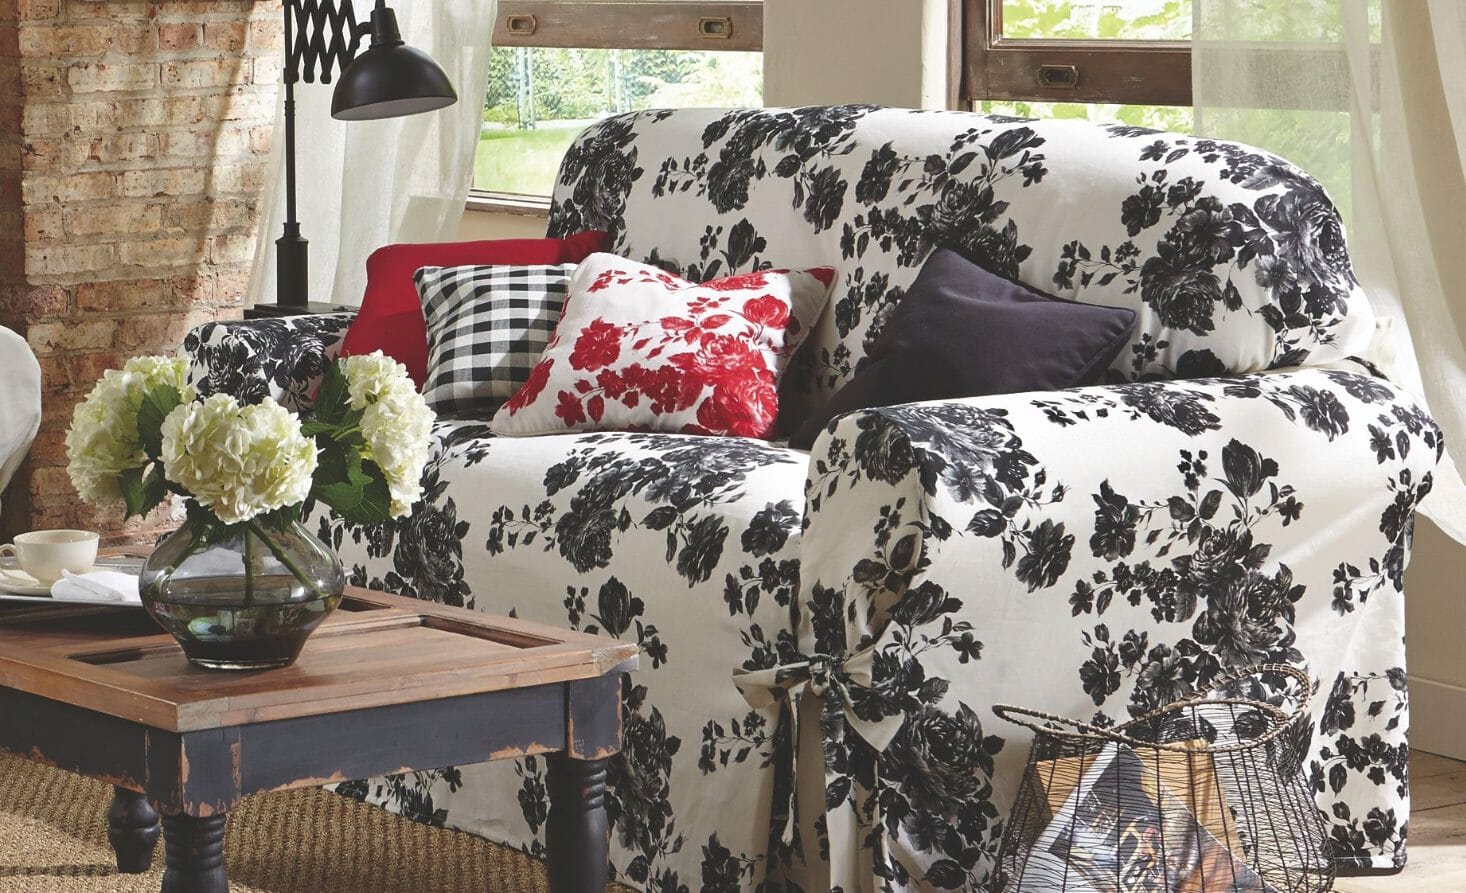 A sofa slipcover in a white and black floral print, red toss pillows, and a coffee table with vased white hydrangeas. 